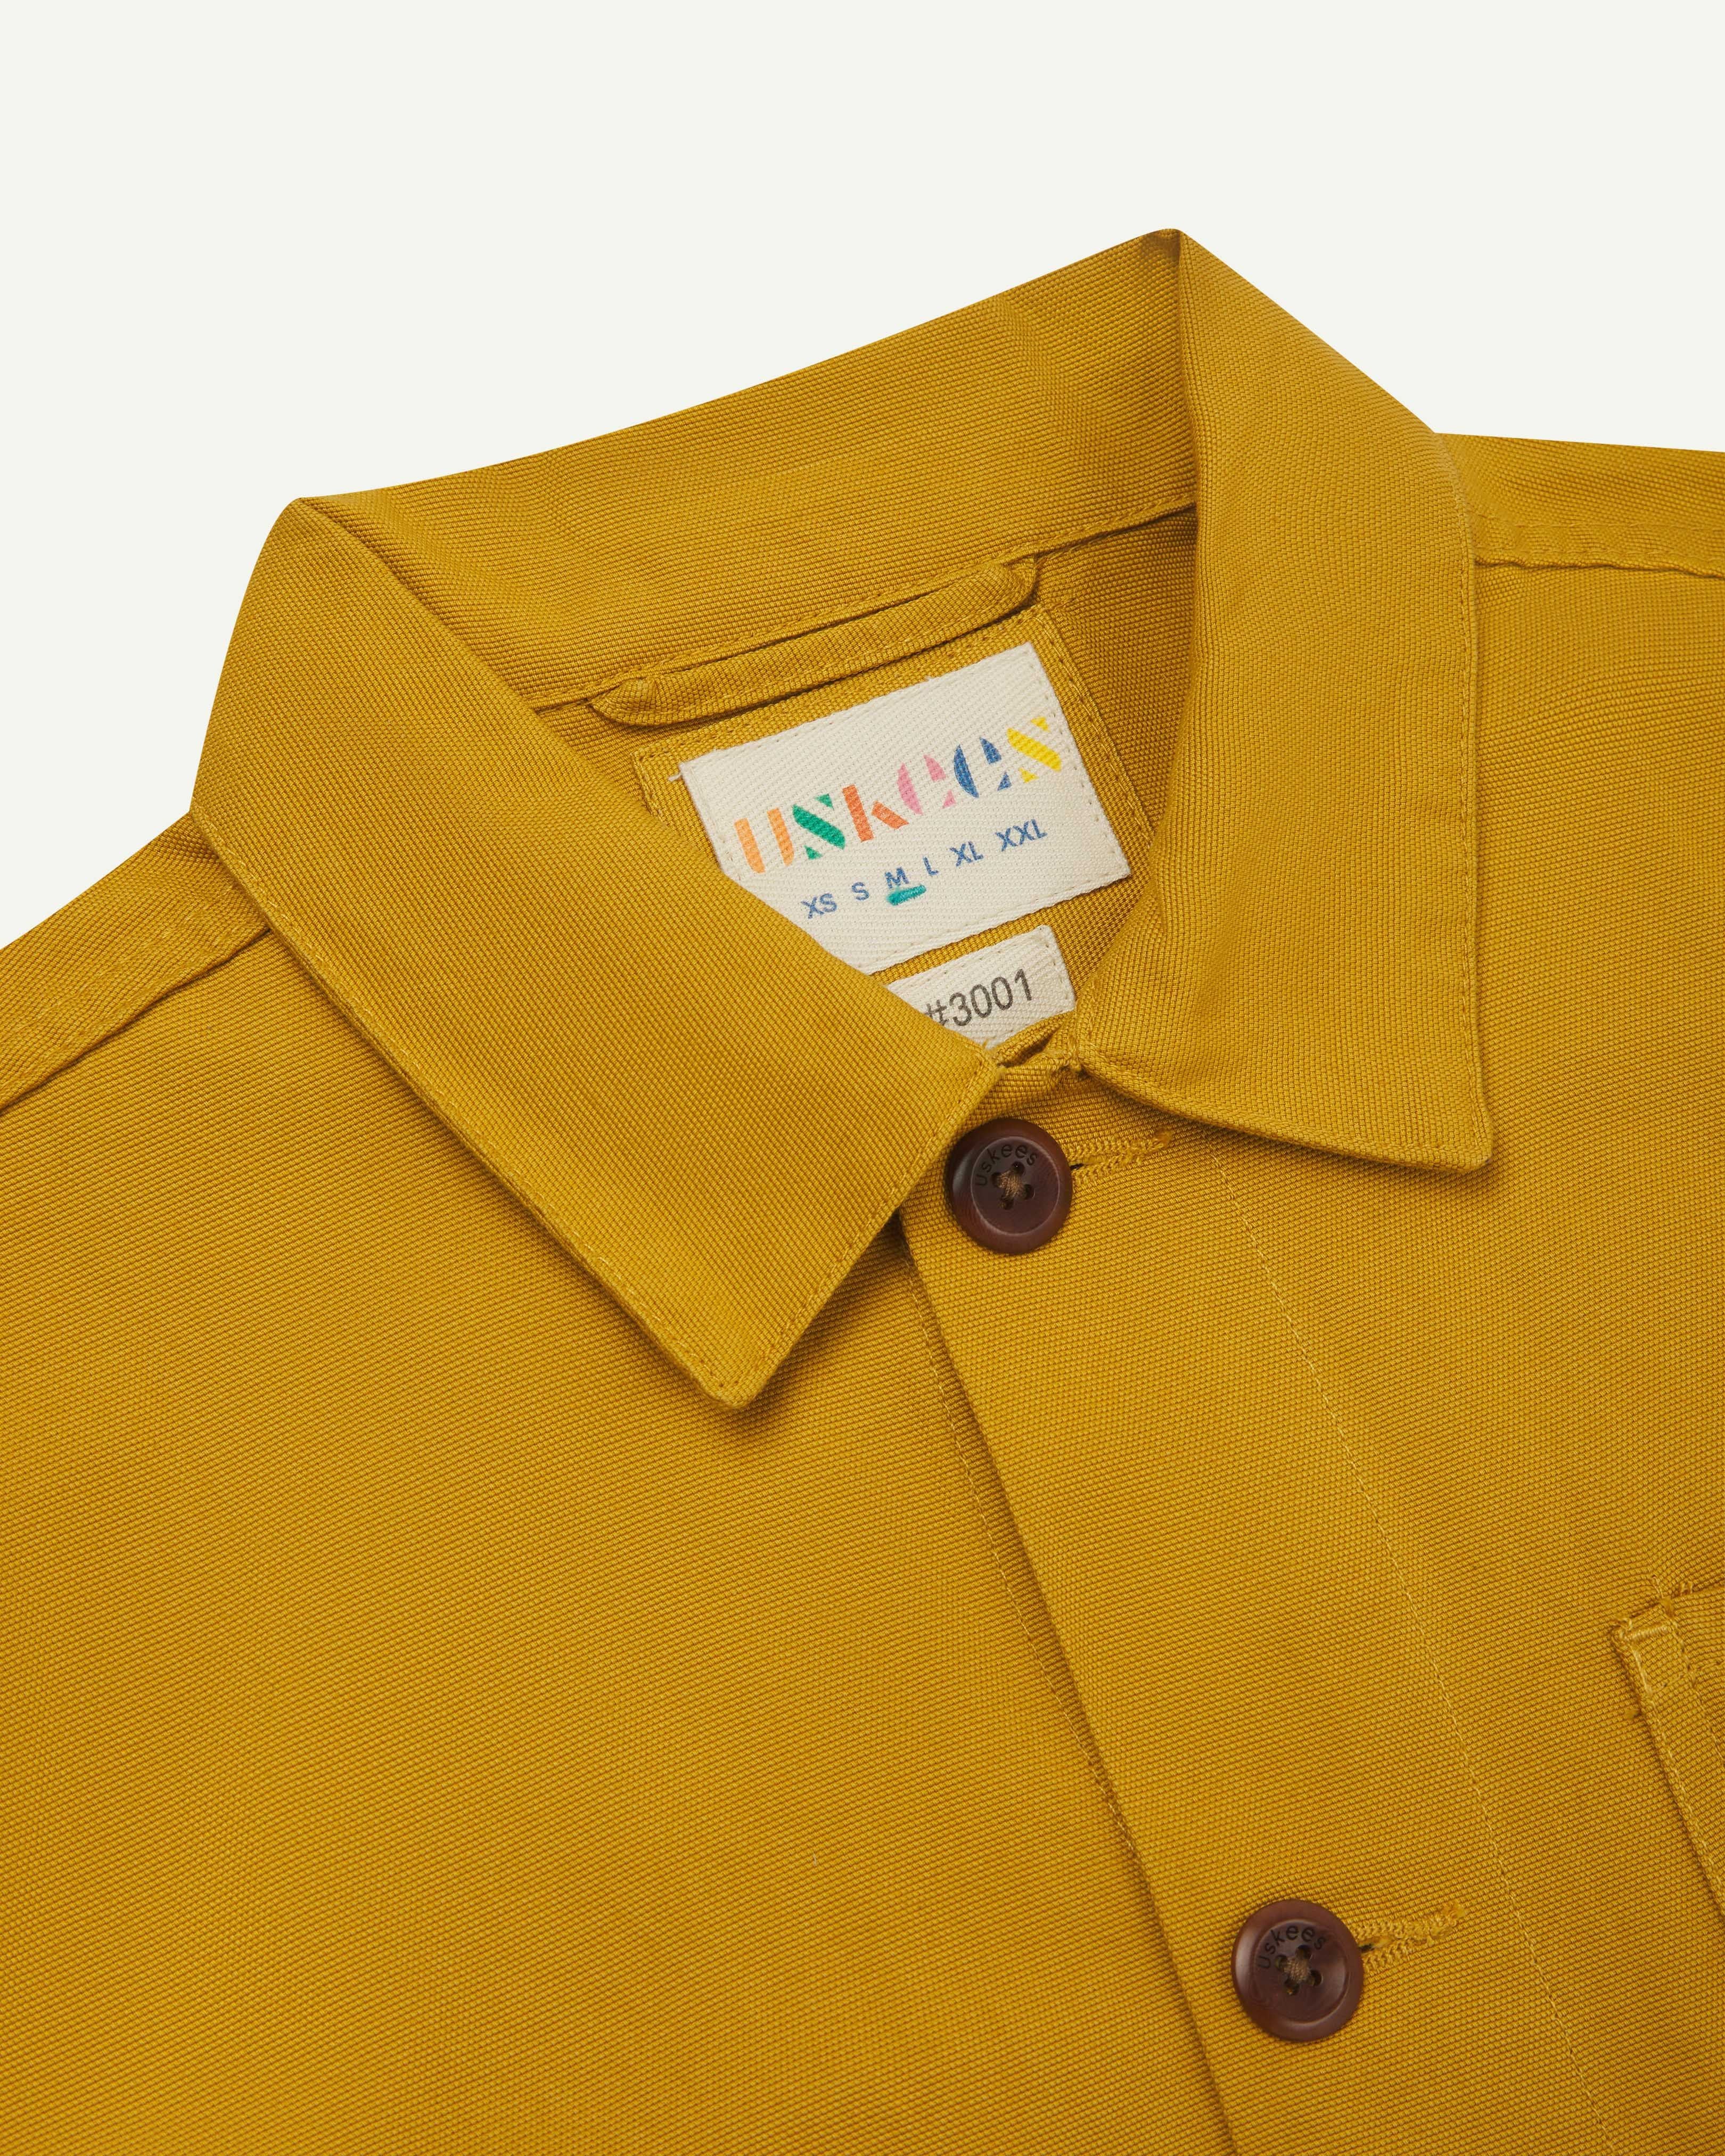 front detail shot of bright yellow, buttoned overshirt for men from Uskees showing the neck label